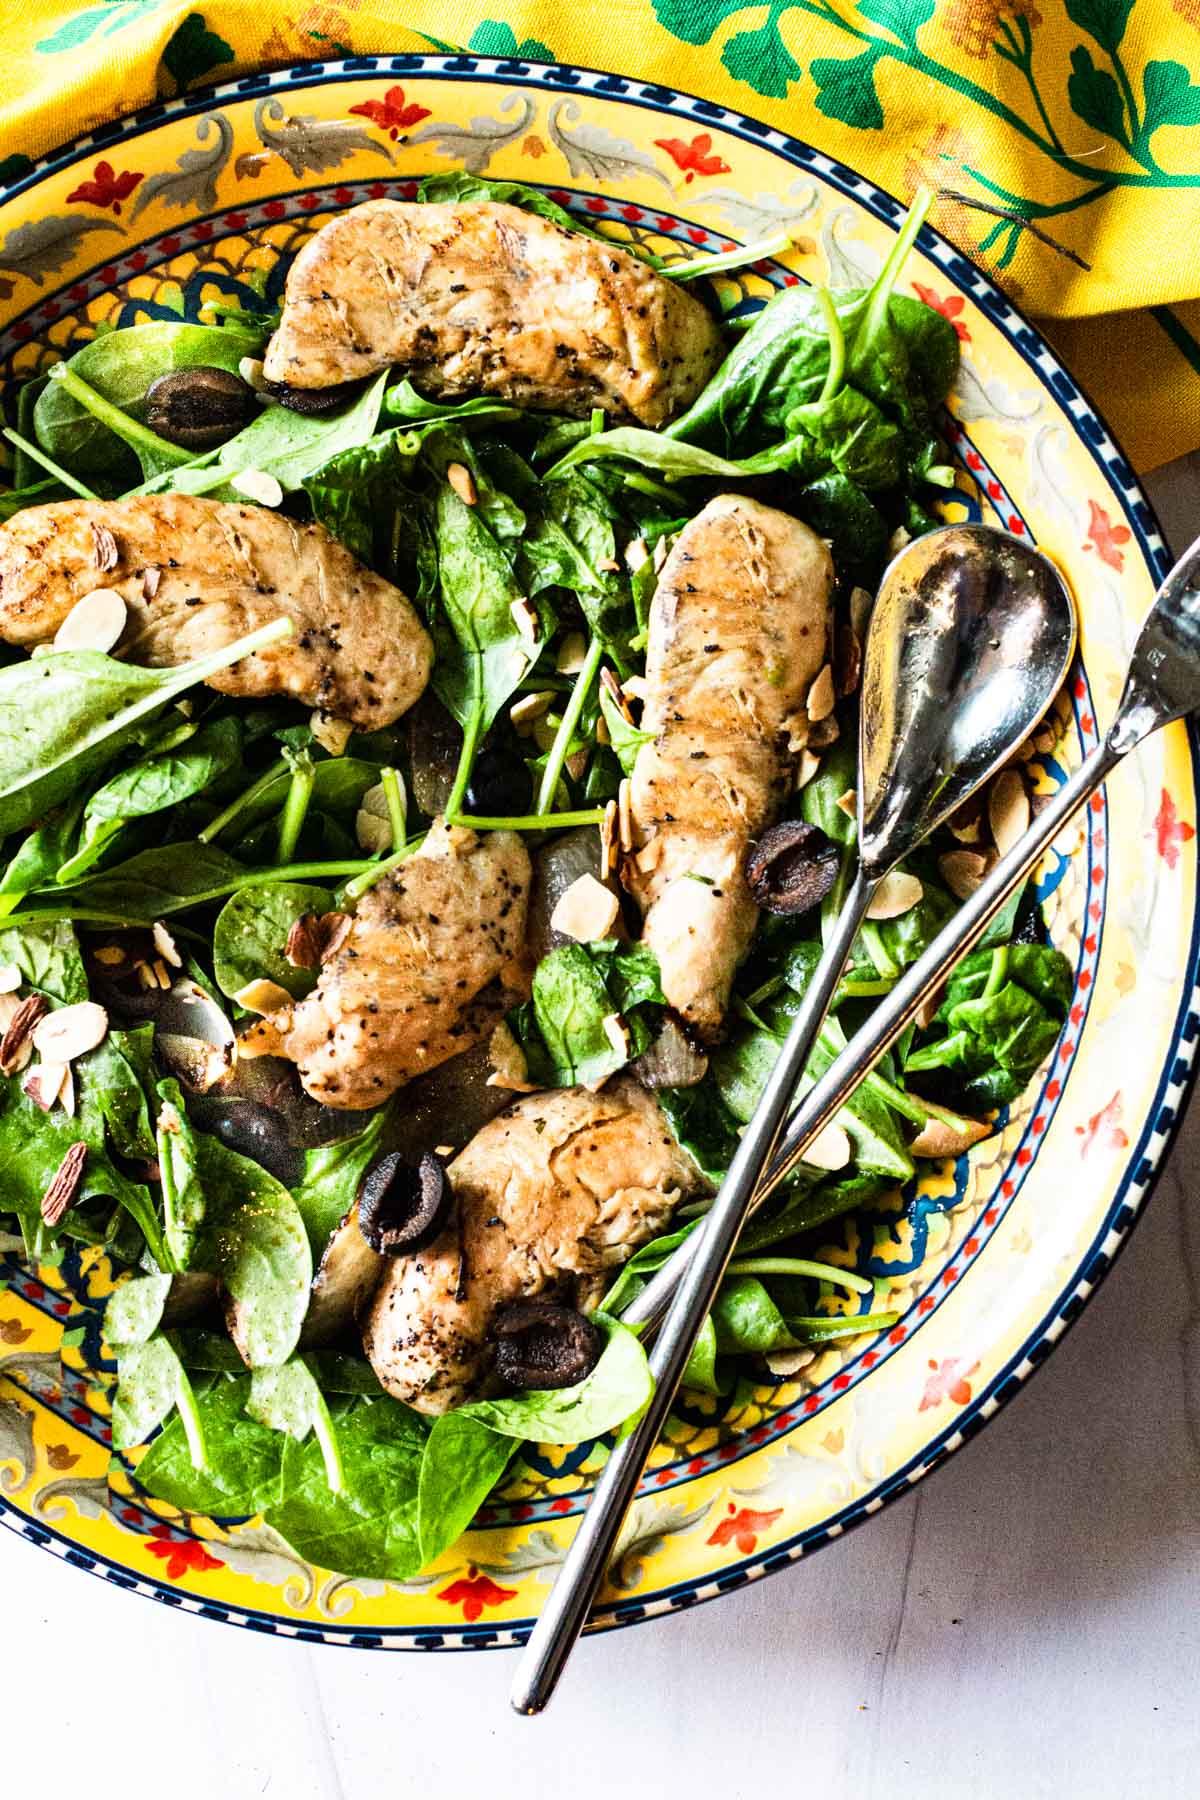 Wilted spinach salad with grilled chicken tenders in a salad bowl.